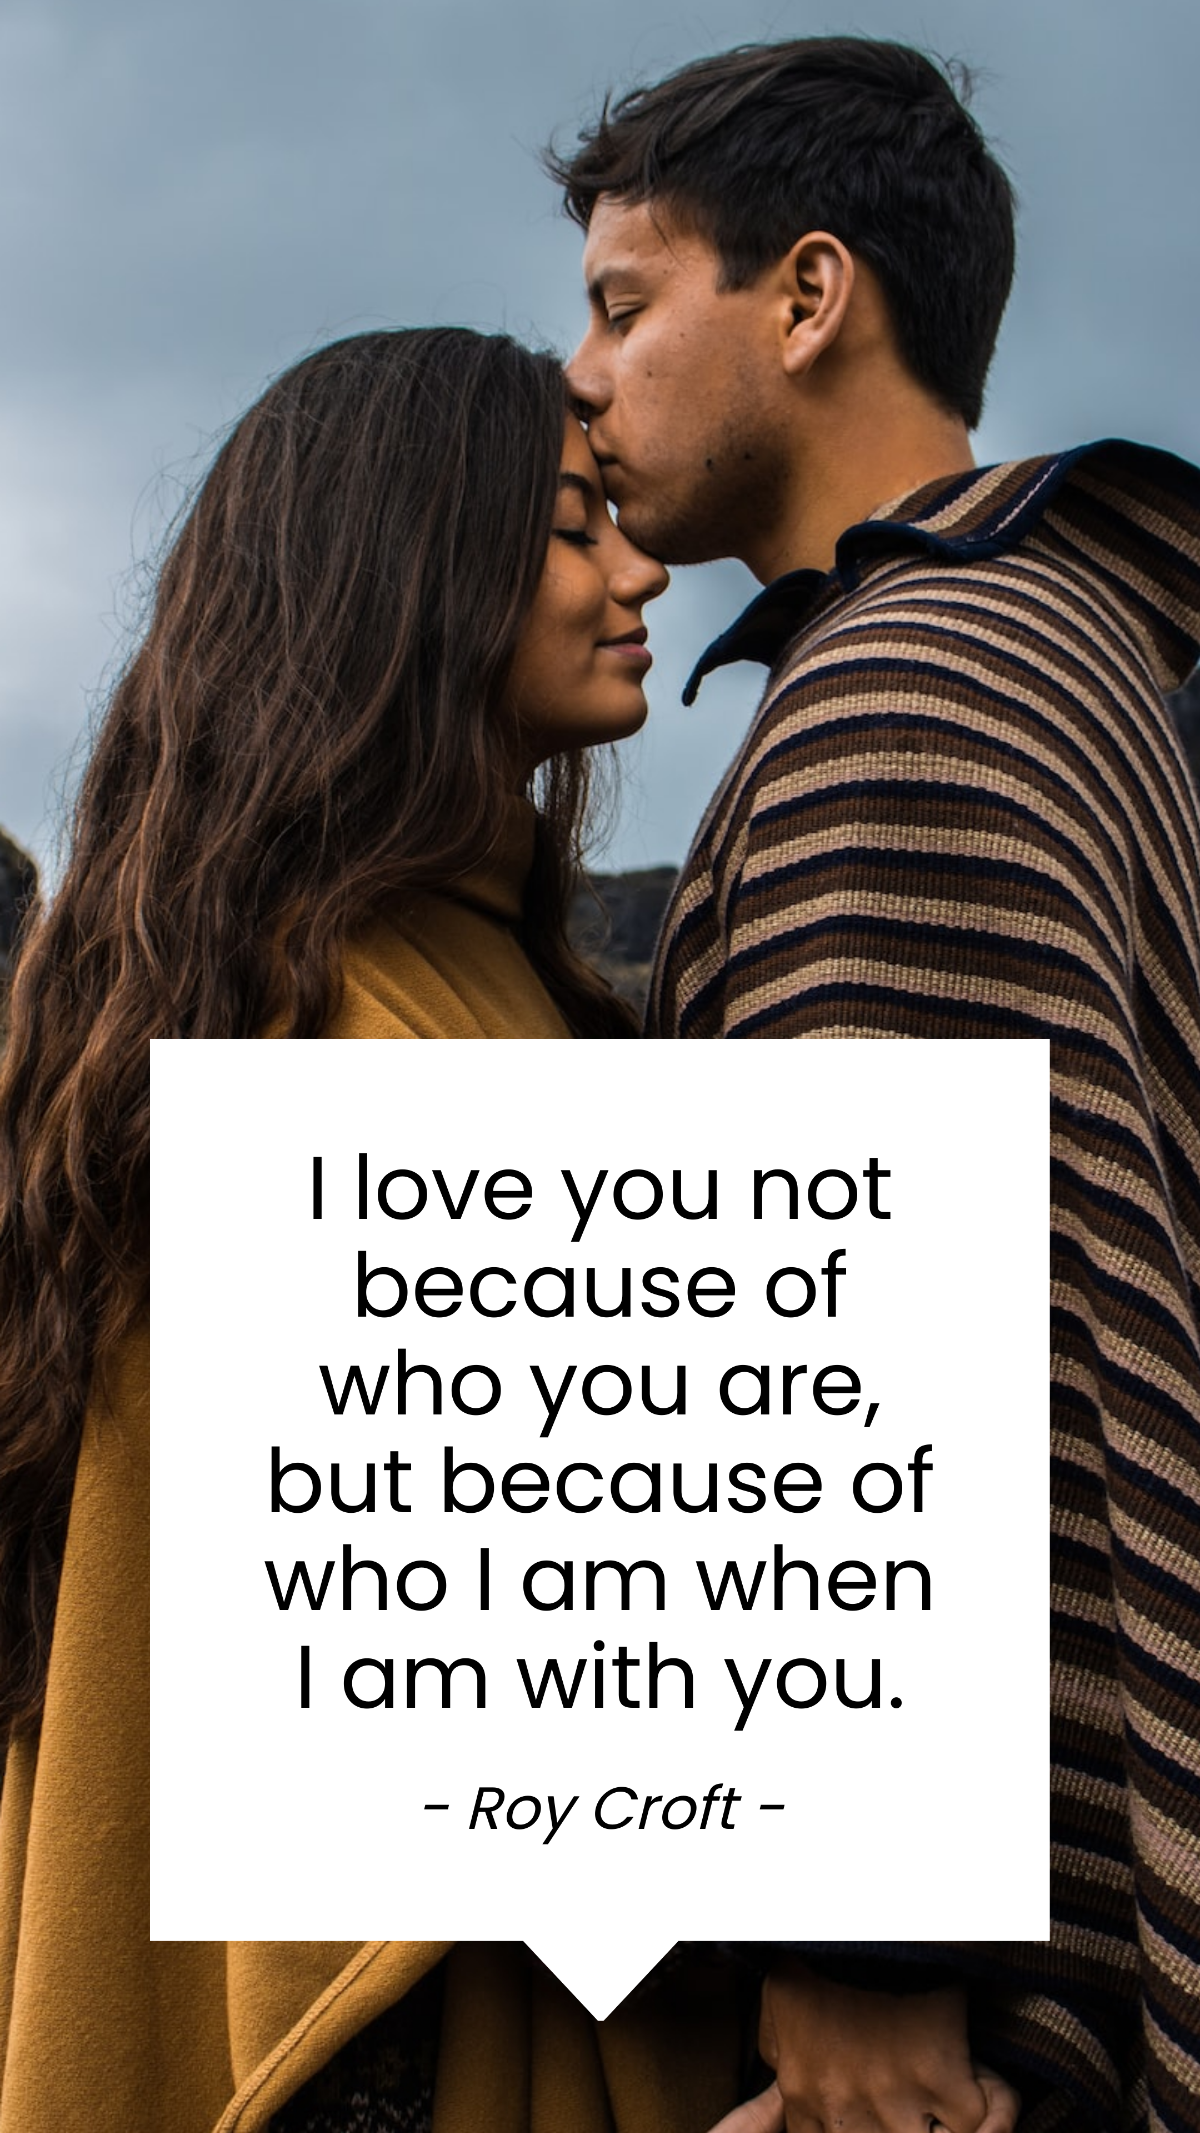 Roy Croft - I love you not because of who you are, but because of who I am when I am with you.